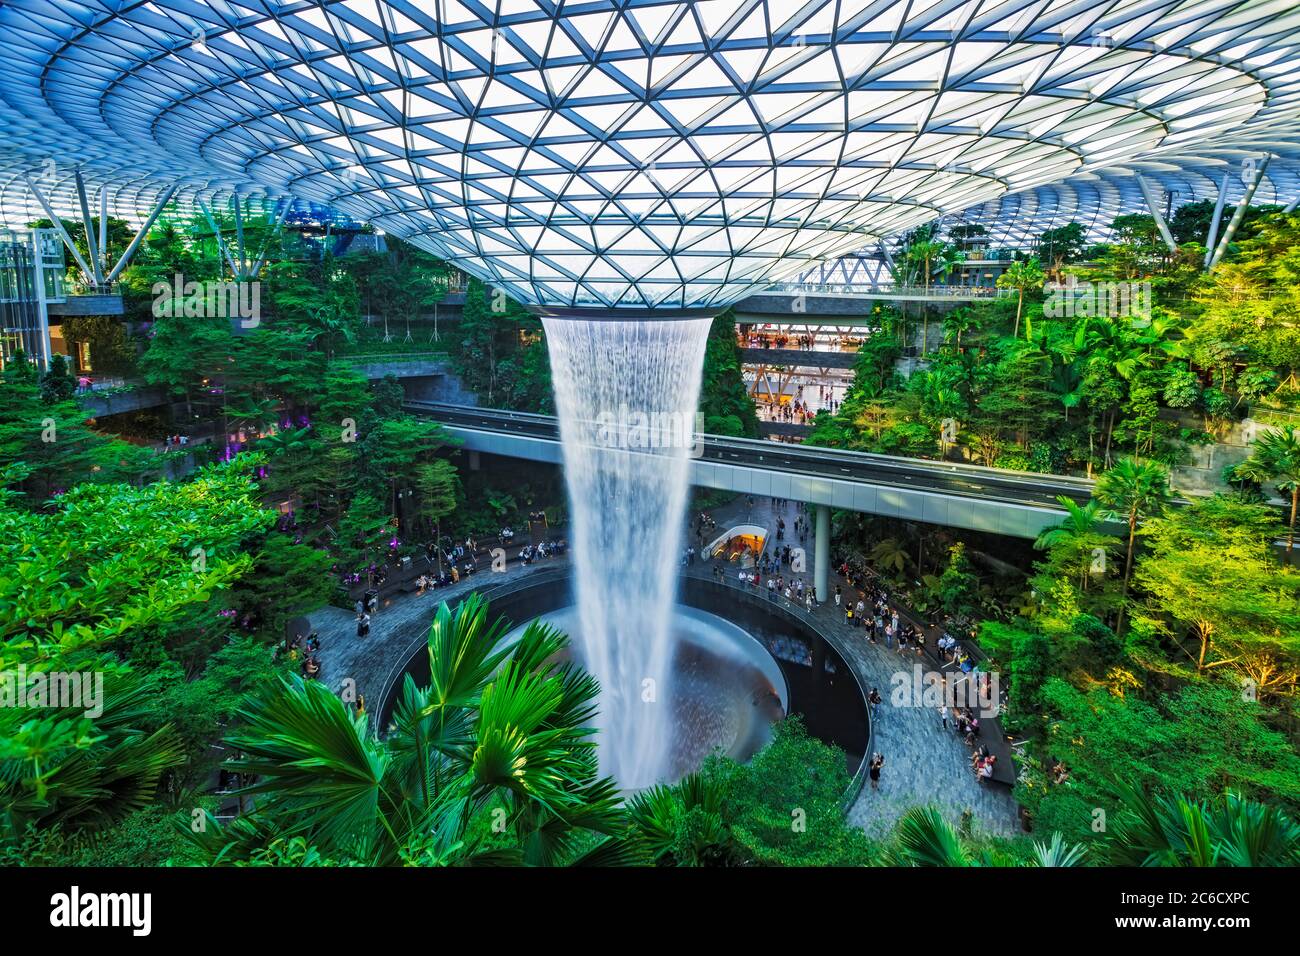 4,457 Jewel Changi Airport Images, Stock Photos, 3D objects